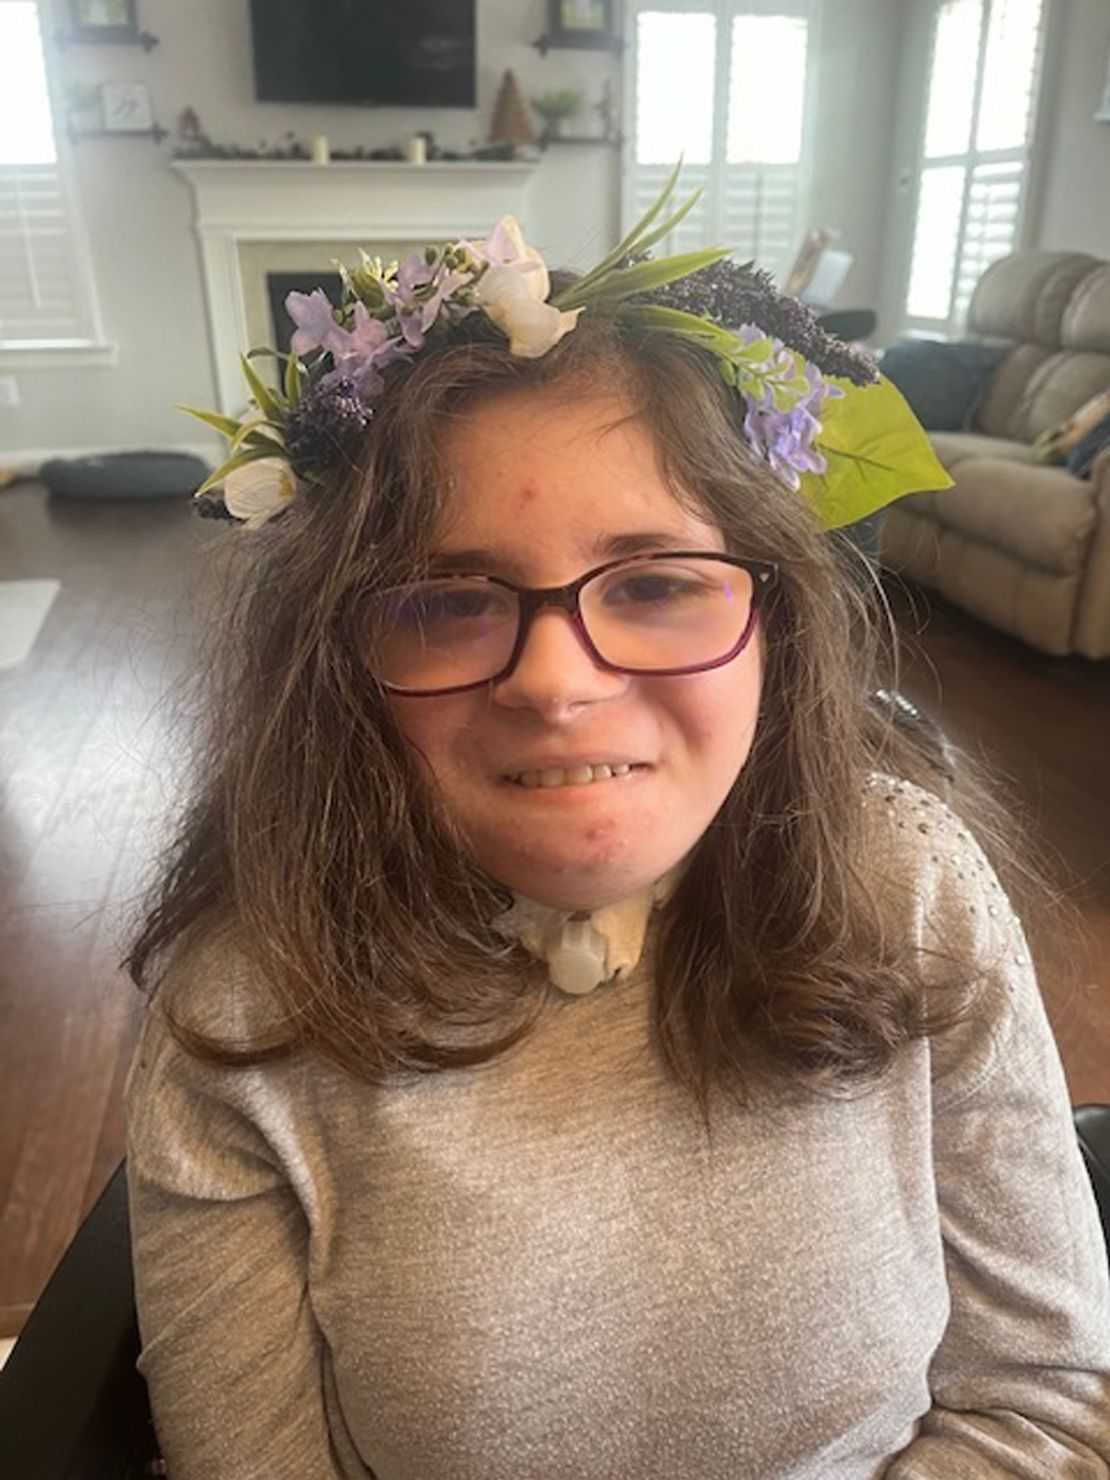 Abby, 13, needs daily asthma medication to help her breathe, but her options have become more expensive and difficult this year.